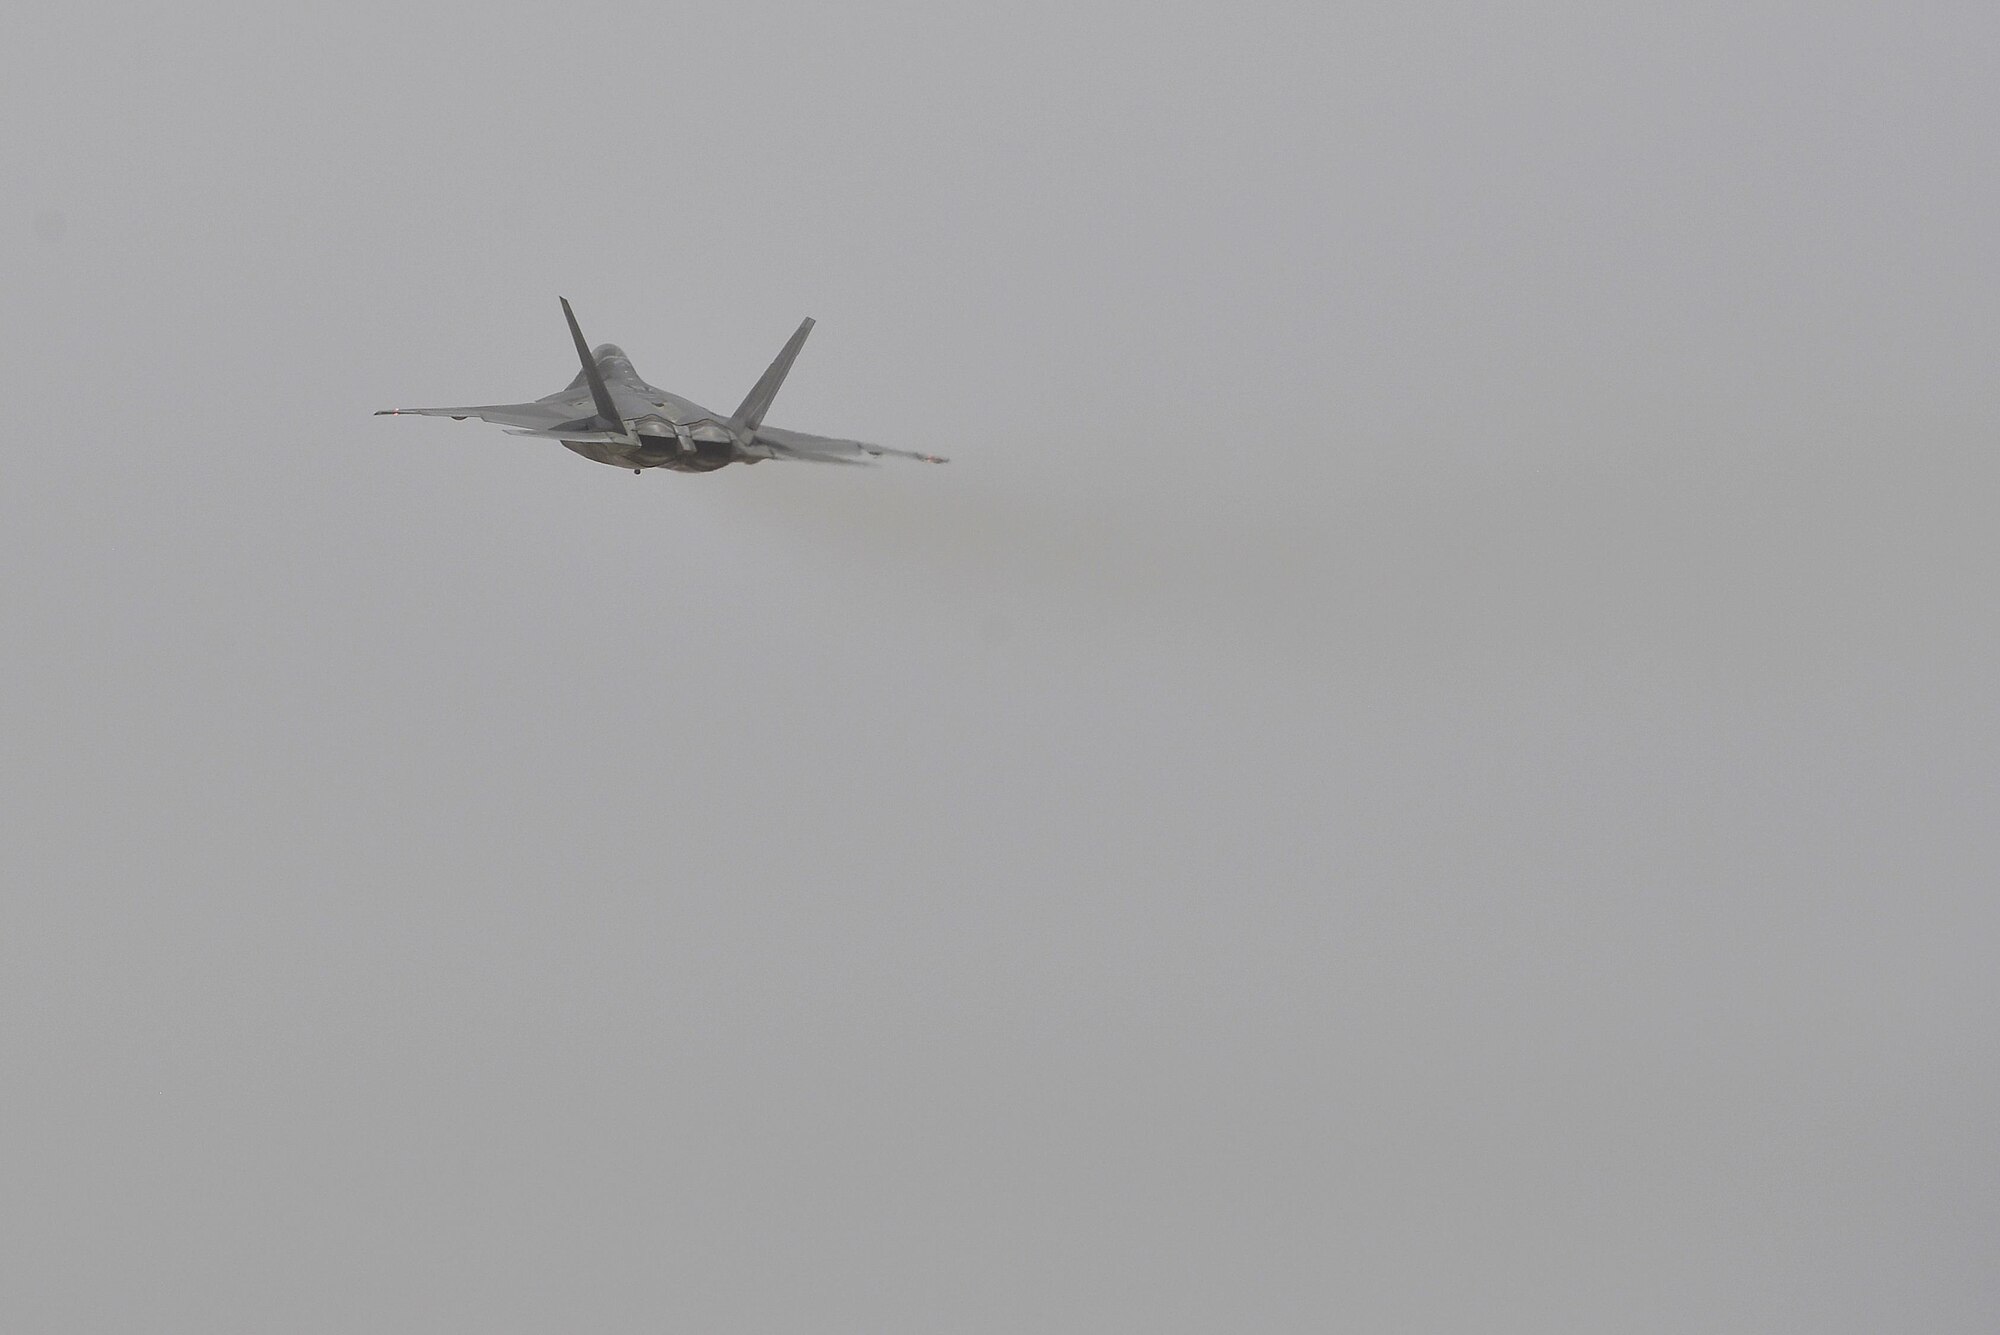 An F-22 Raptor takes off from the runway during a combat sortie at an undisclosed location in Southwest Asia July 9, 2015. The F-22 is a fifth-generation aircraft and is designed to engage in air-to-air and air-to-ground missions. (U.S. Air Force photo/Tech. Sgt. Christopher Boitz)